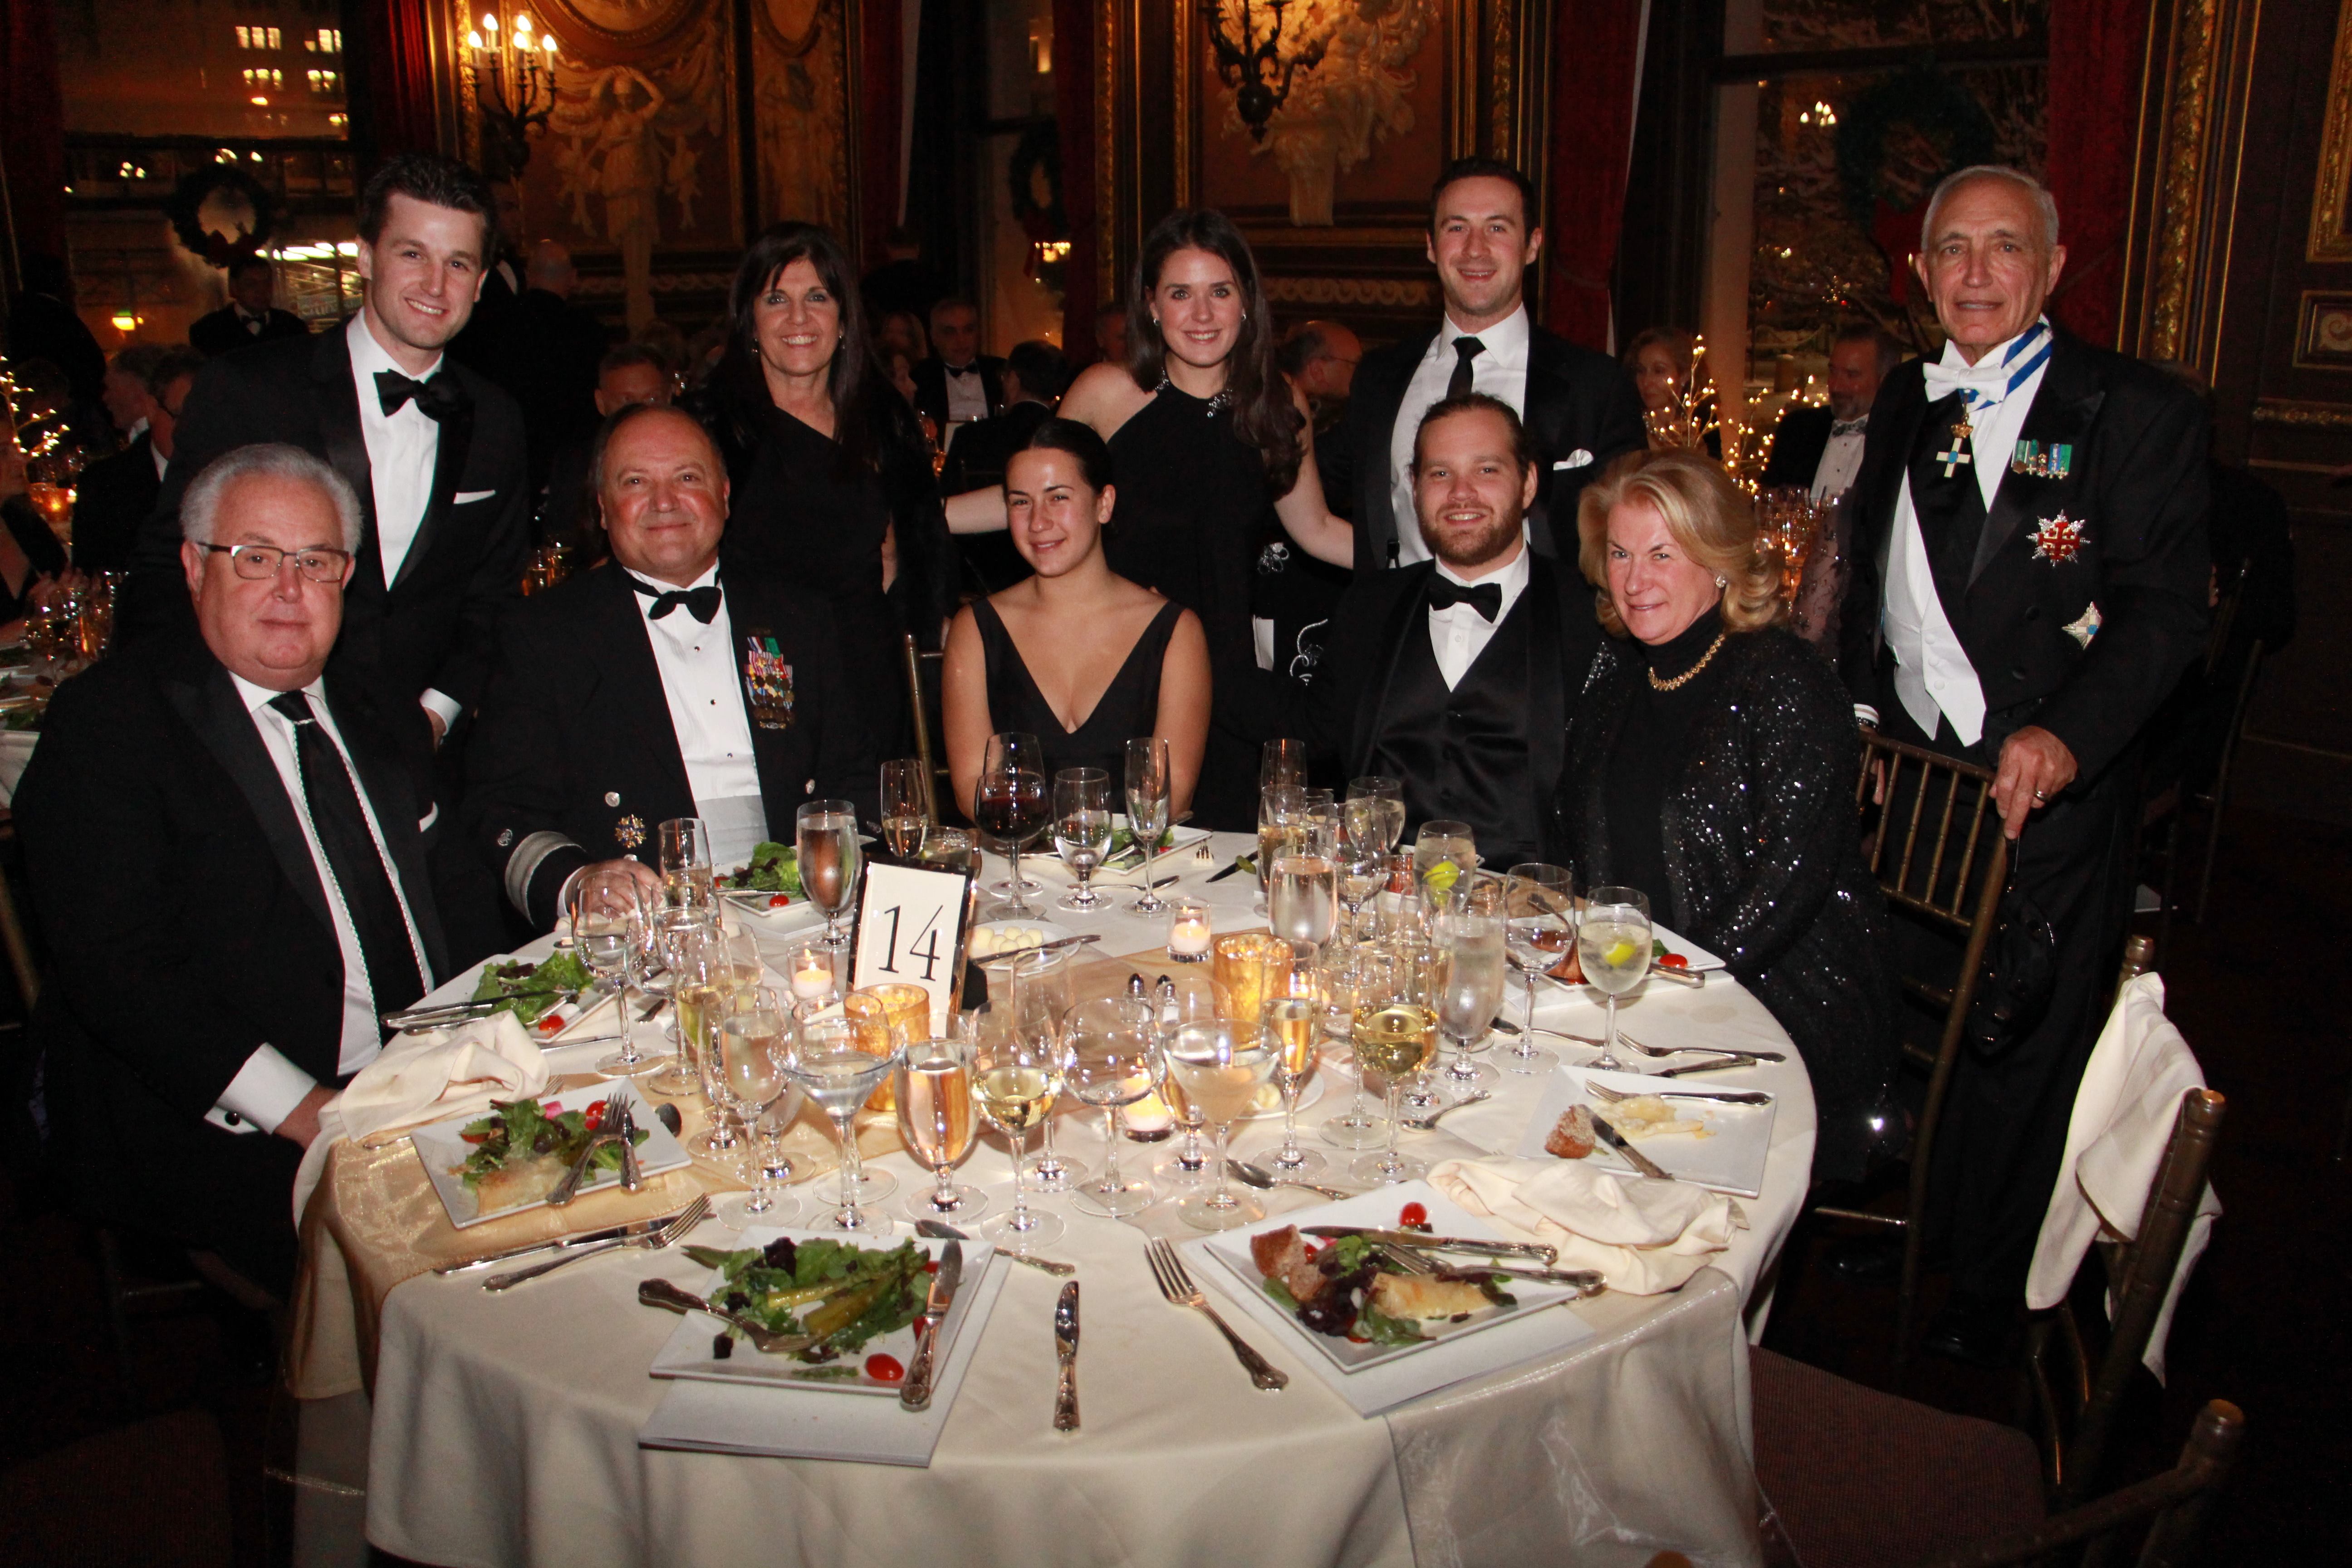 Table of Ballo di Savoia Co-Chairs and Gold Sponsors, Mr. and Mrs. Vincent Pica II